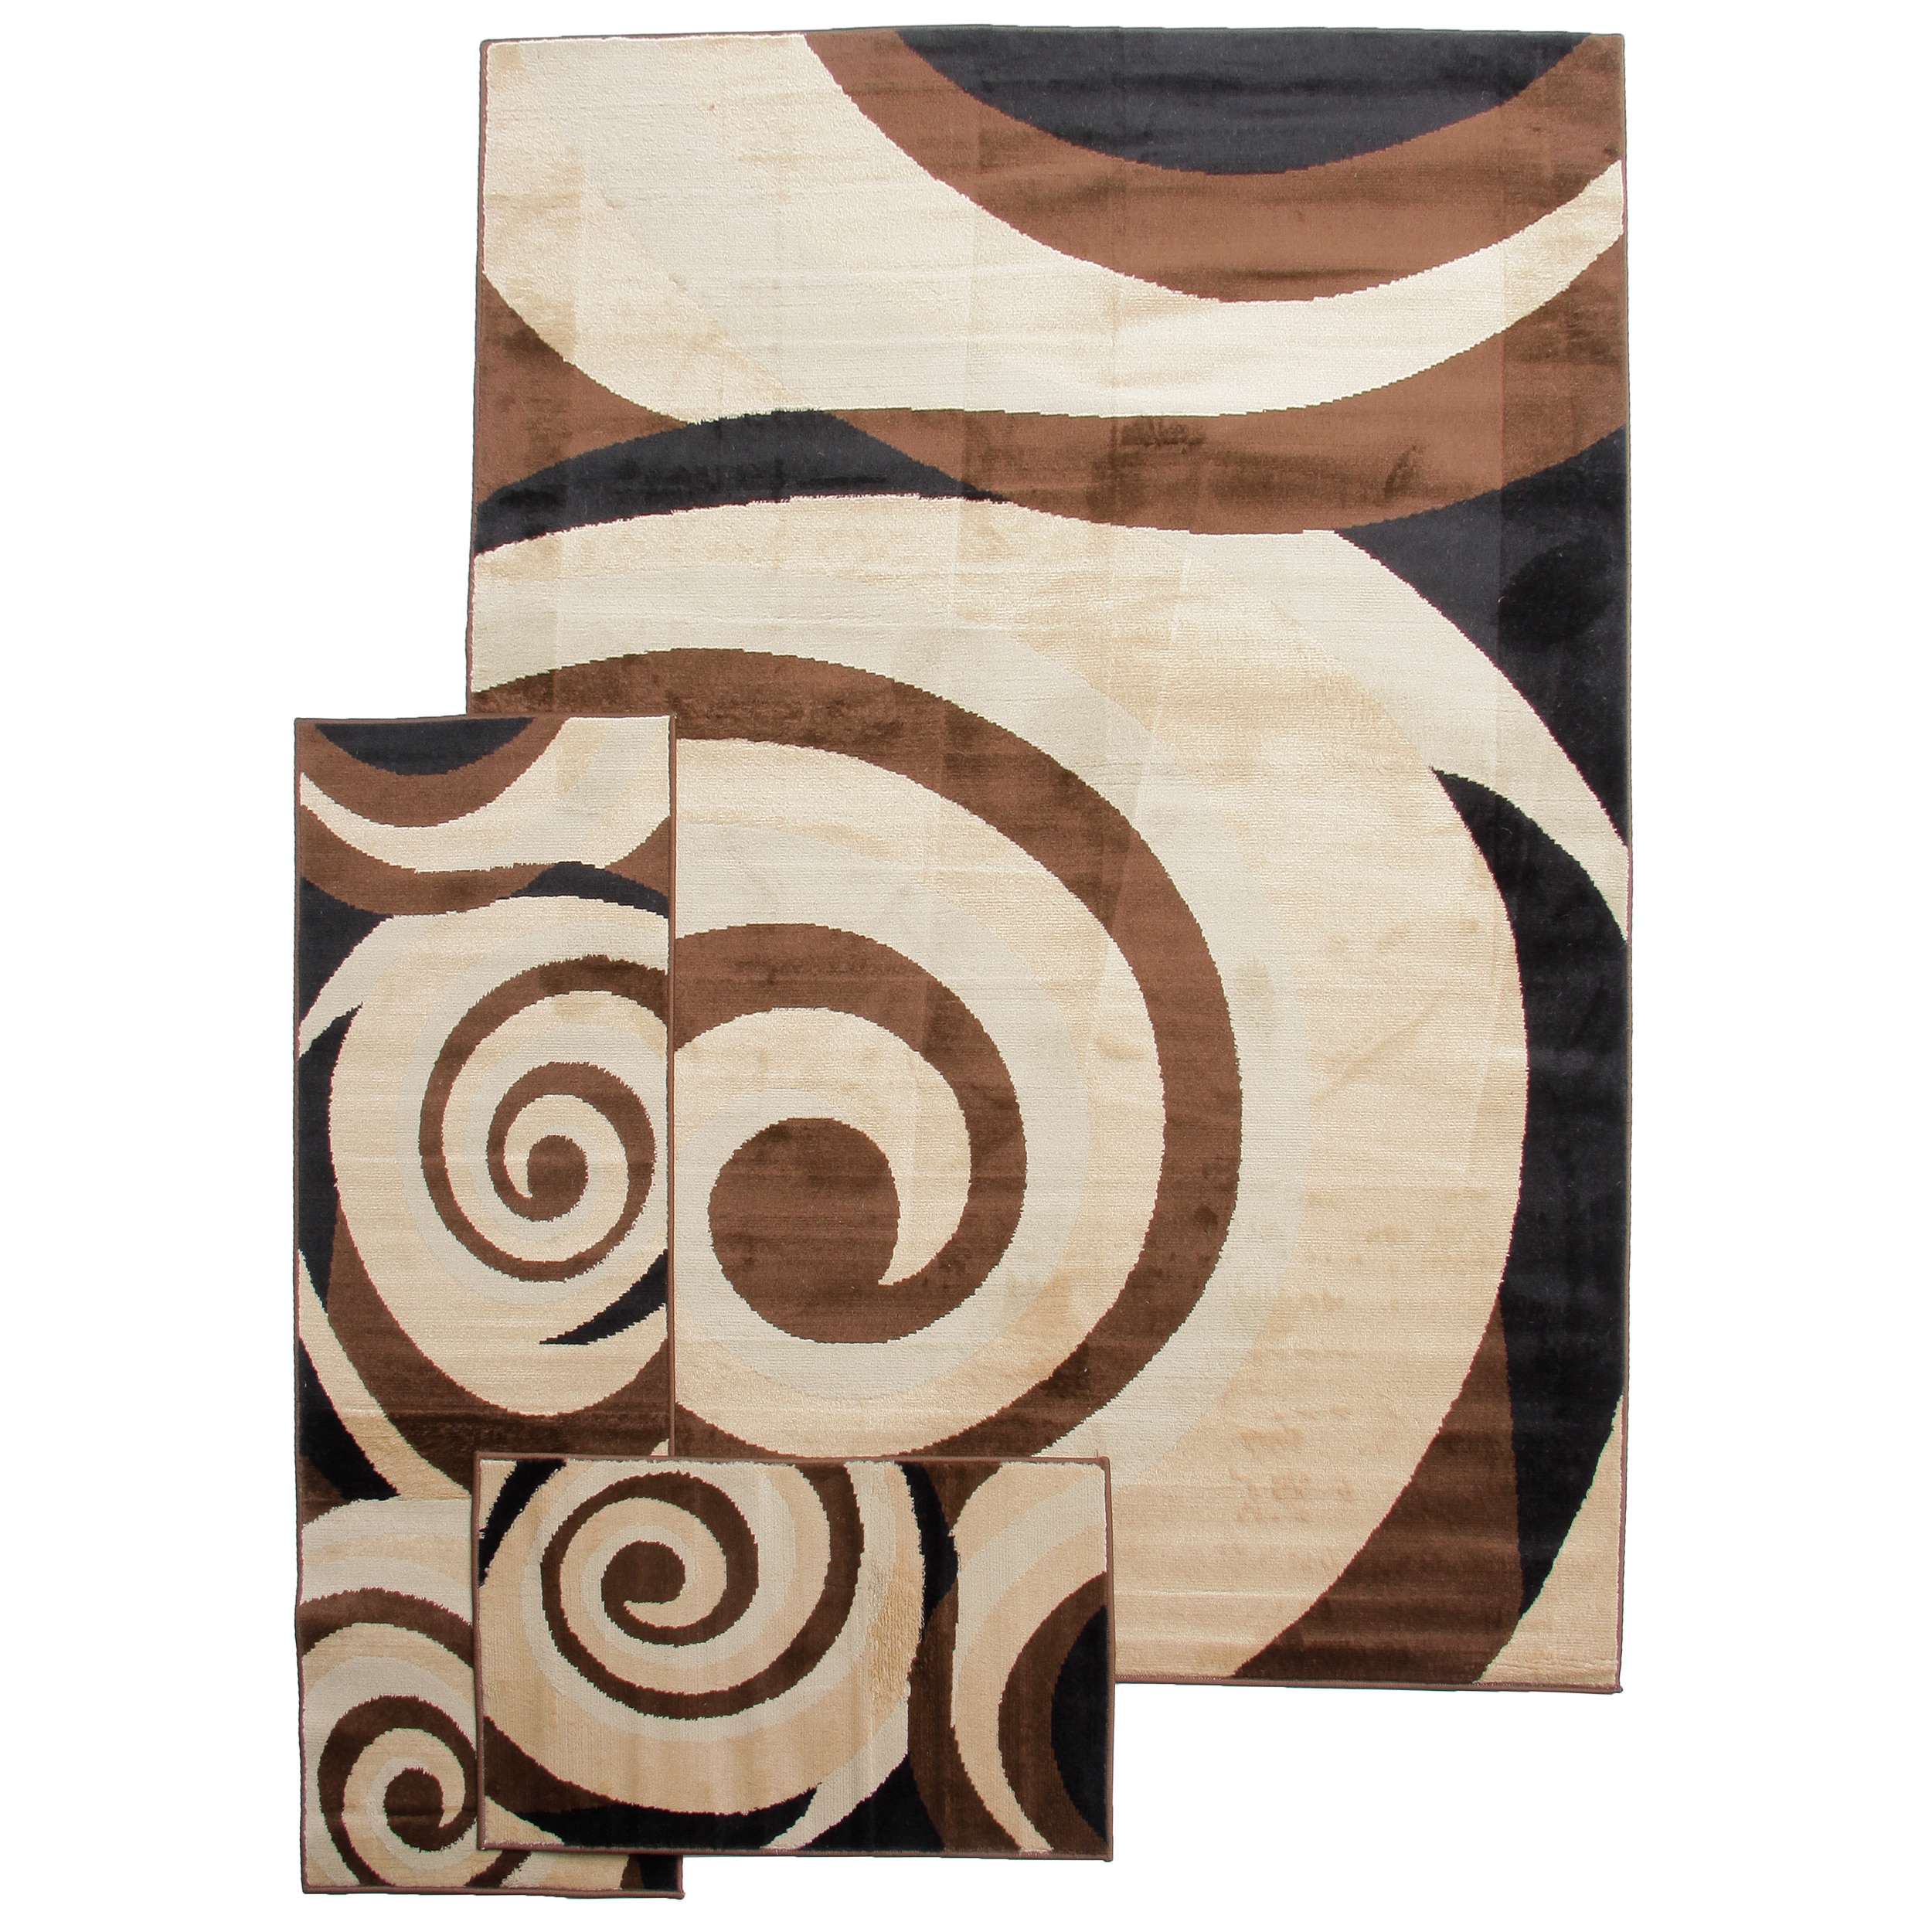 Contemporary Scrolls Waves Beige Ivory 3 piece Rug Set Today $83.99 3